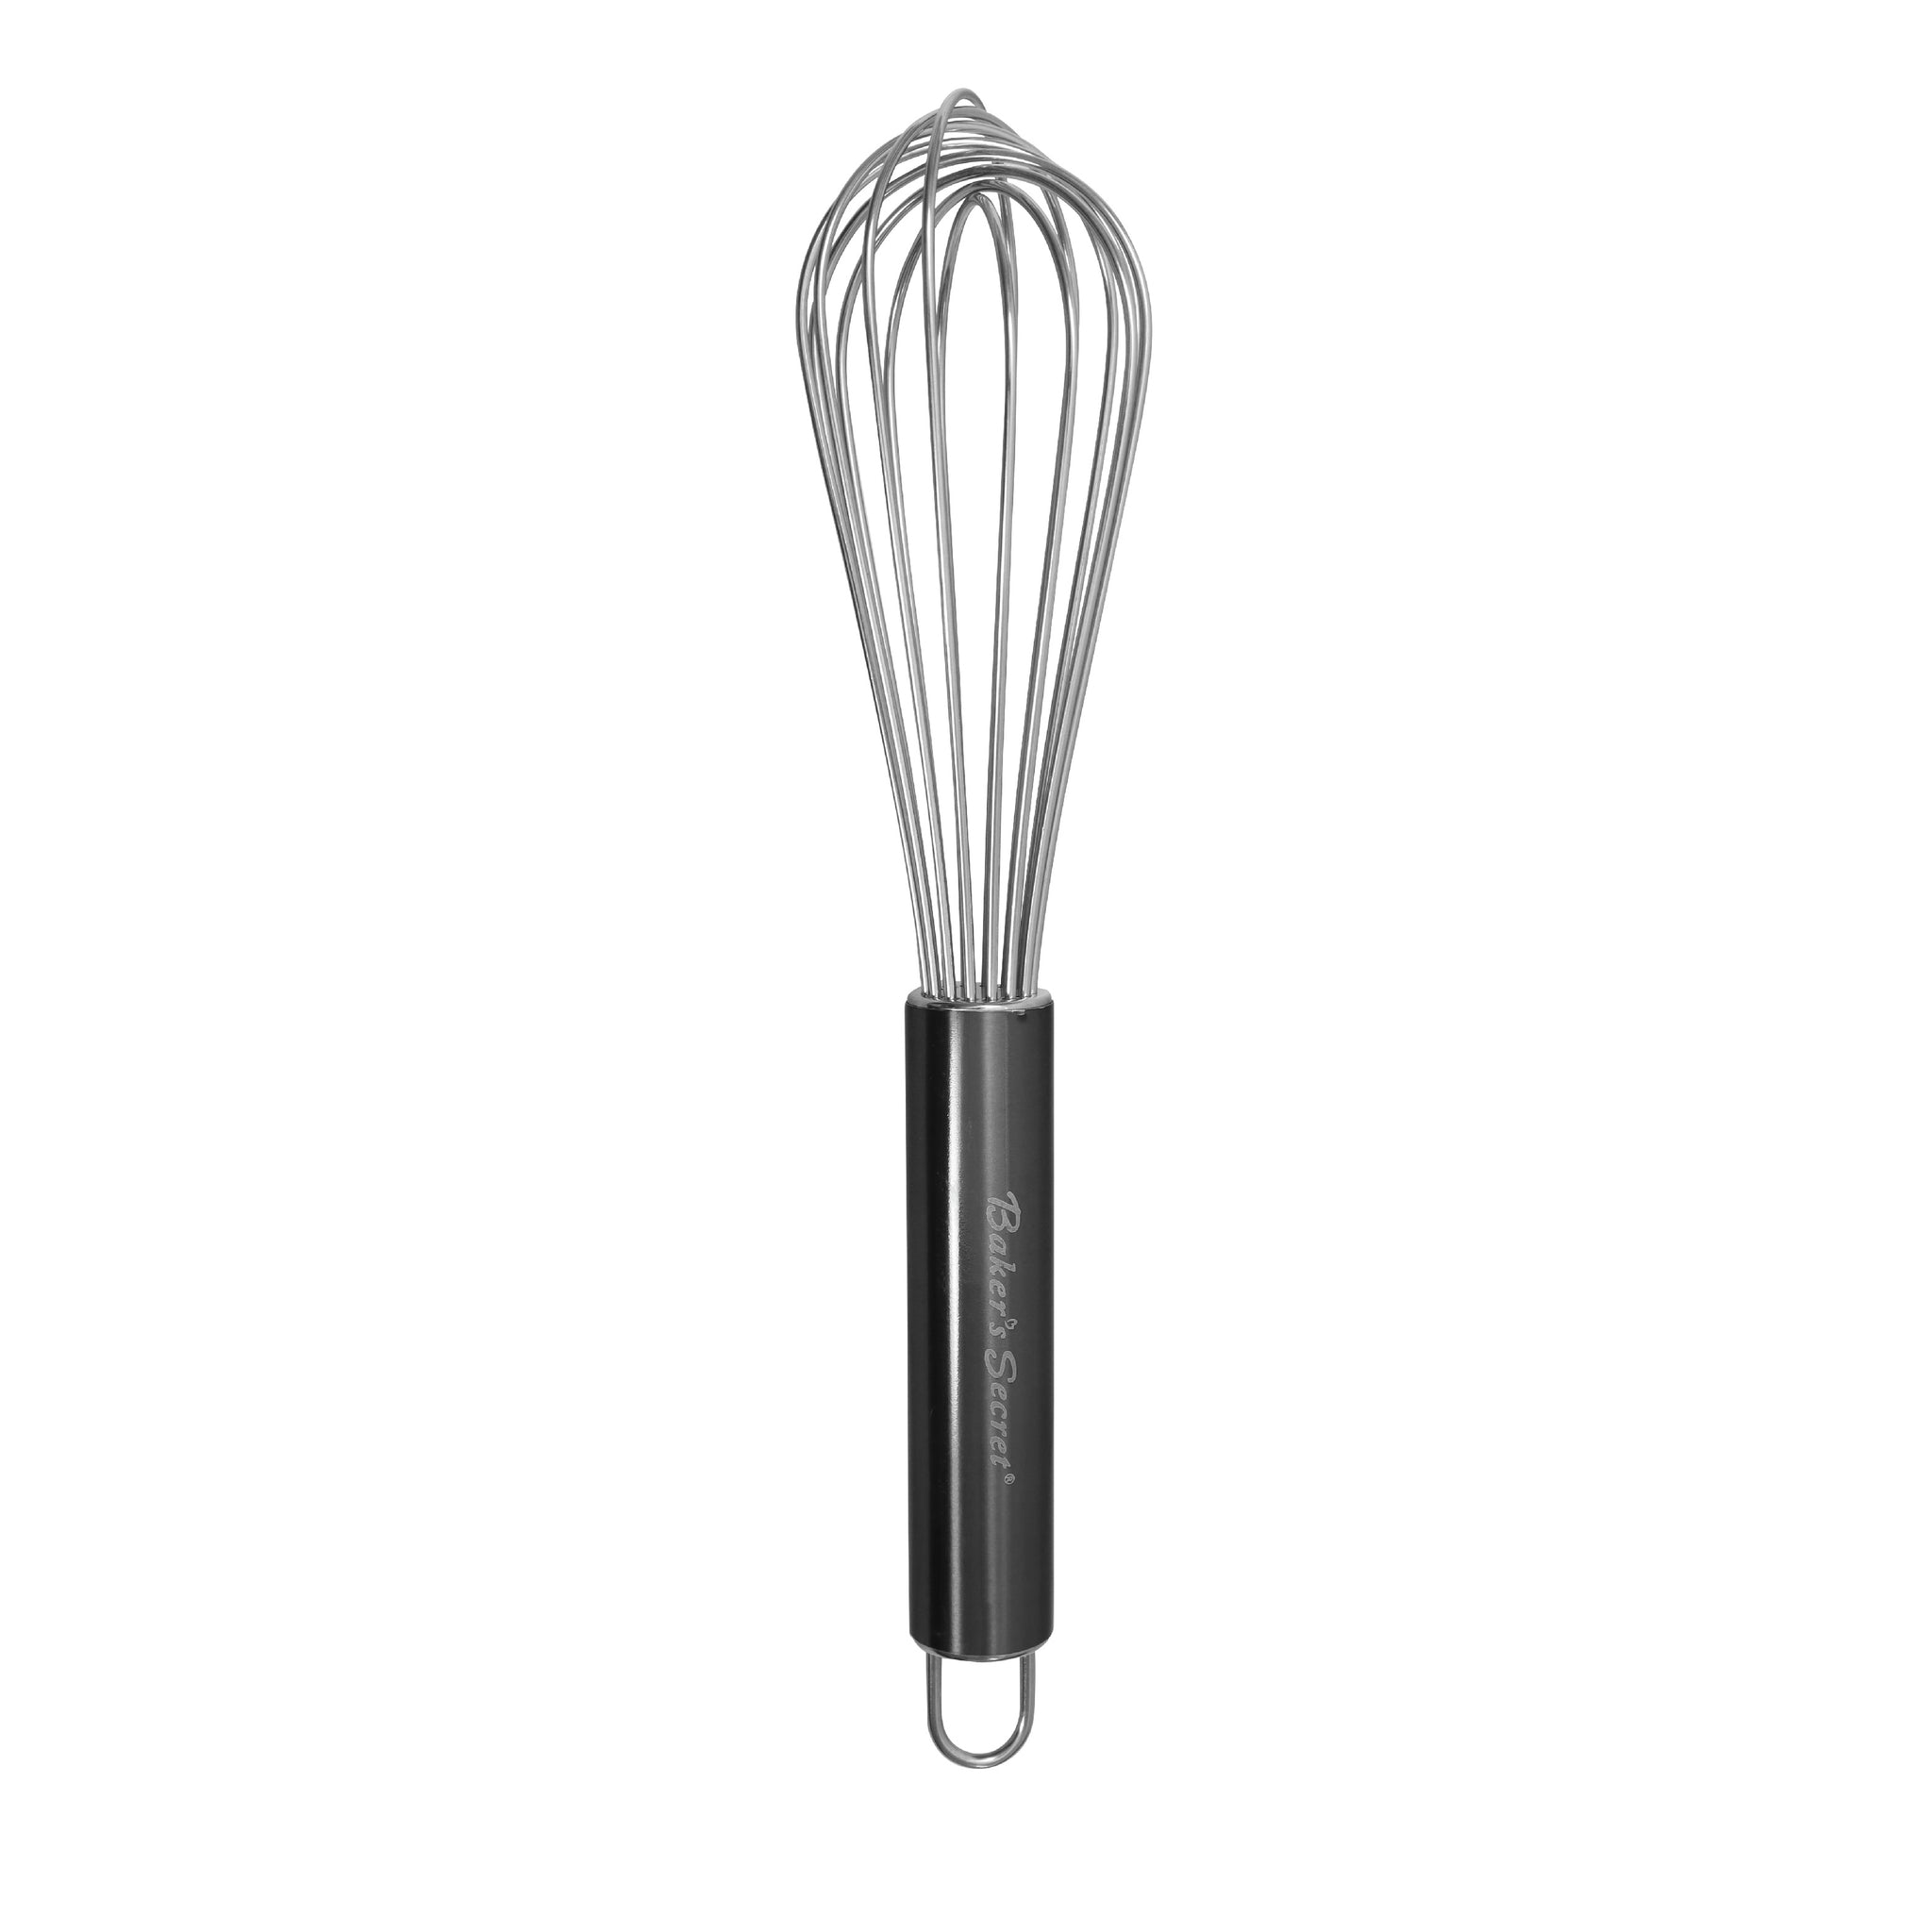 Stainless Steel Whisks 10" / Silver Cookware Accessories - Baker's Secret